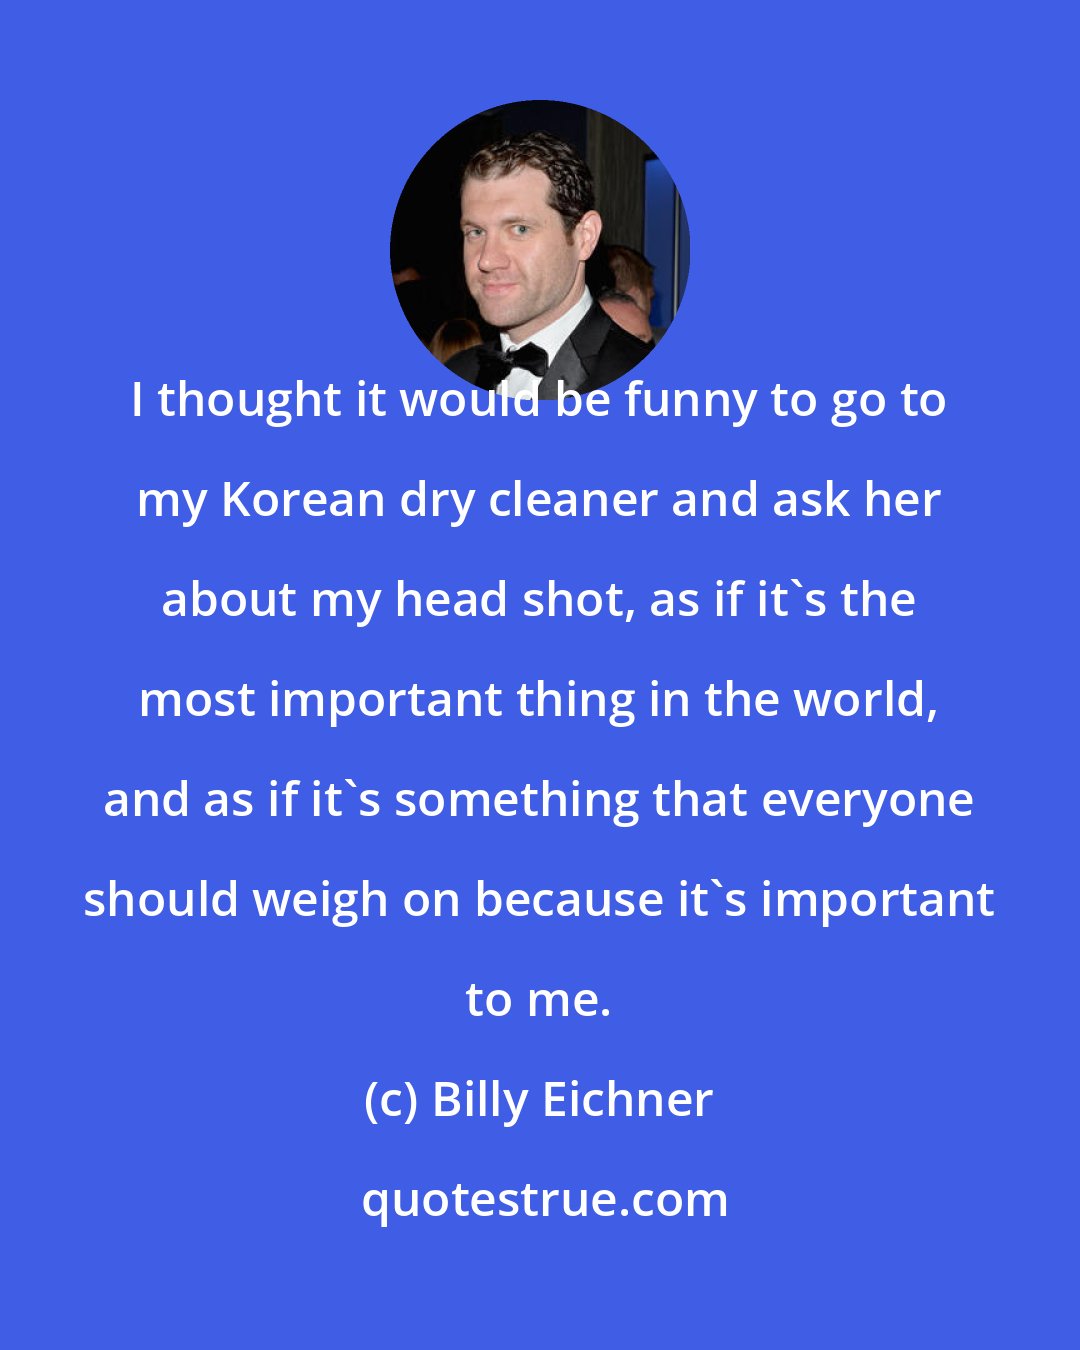 Billy Eichner: I thought it would be funny to go to my Korean dry cleaner and ask her about my head shot, as if it's the most important thing in the world, and as if it's something that everyone should weigh on because it's important to me.